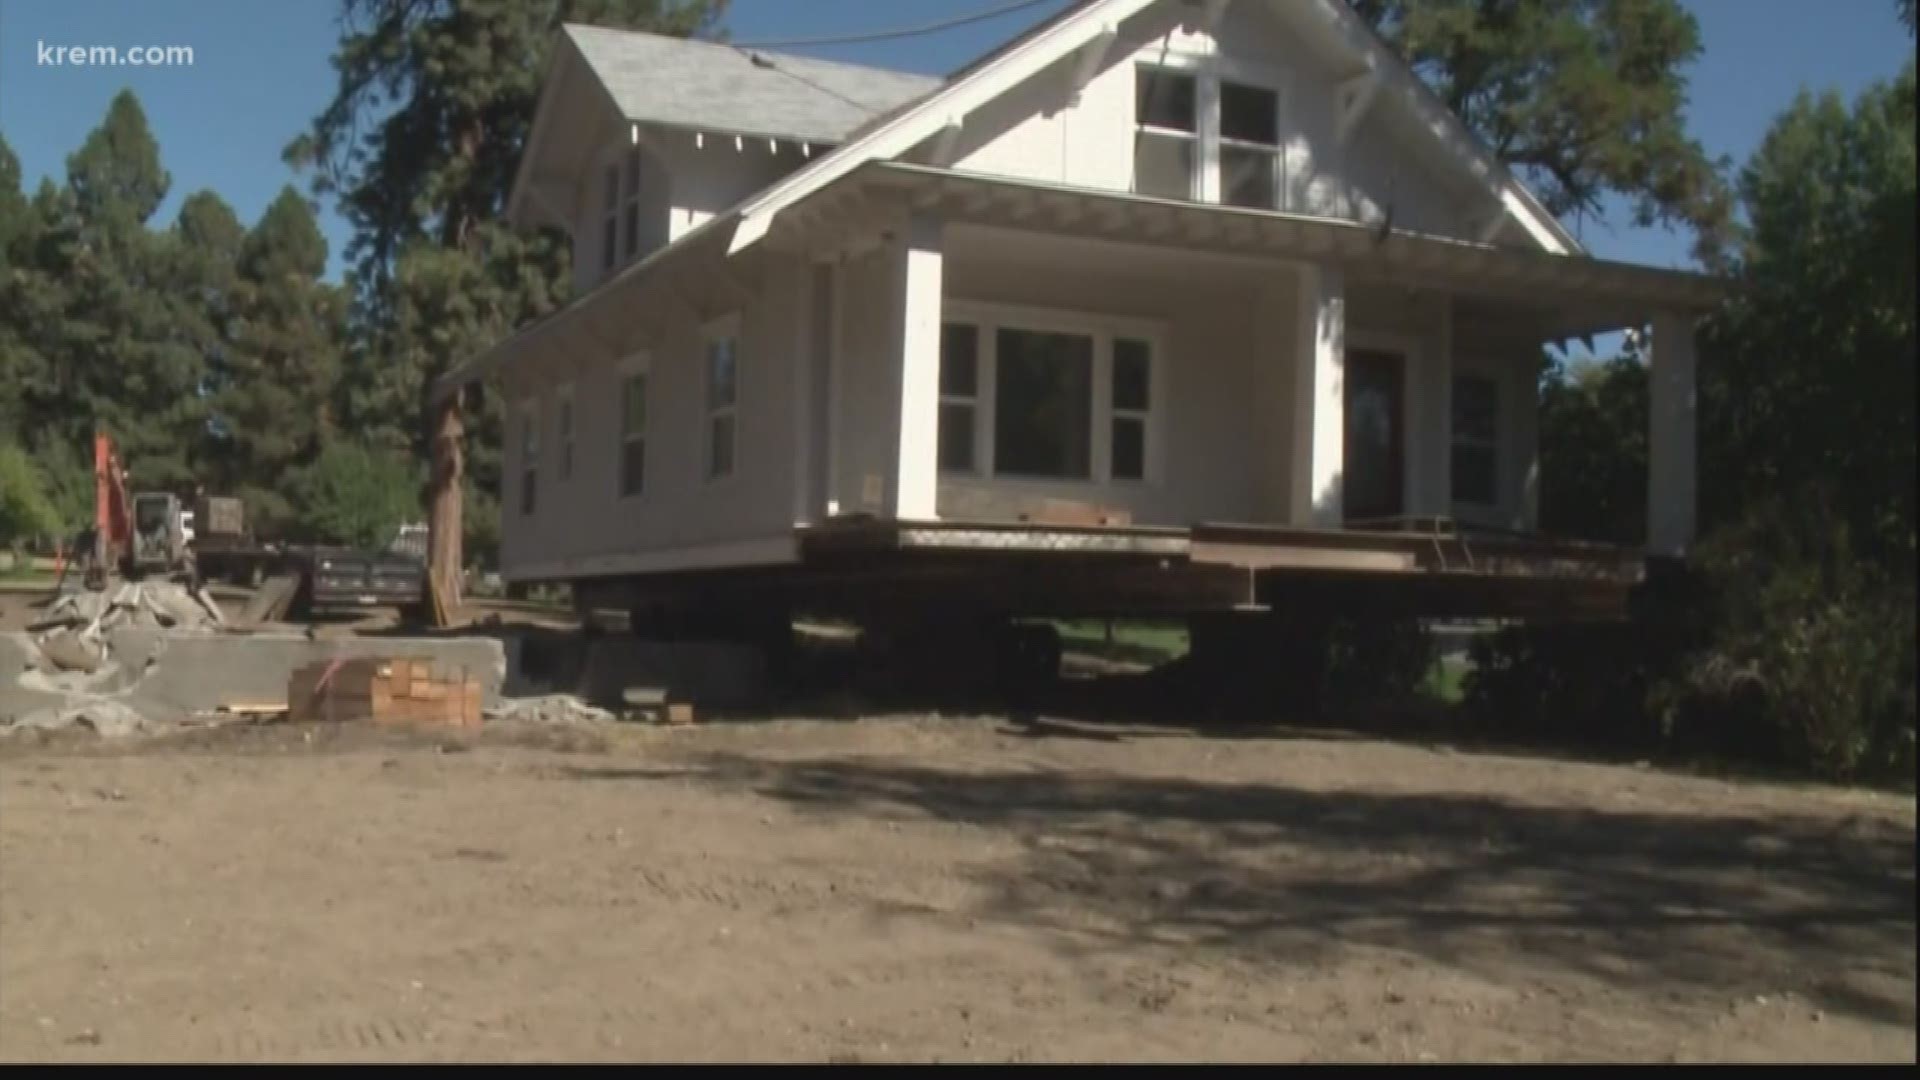 115-year-old home to float across Lake Coeur d'Alene on Monday (09-18-18)